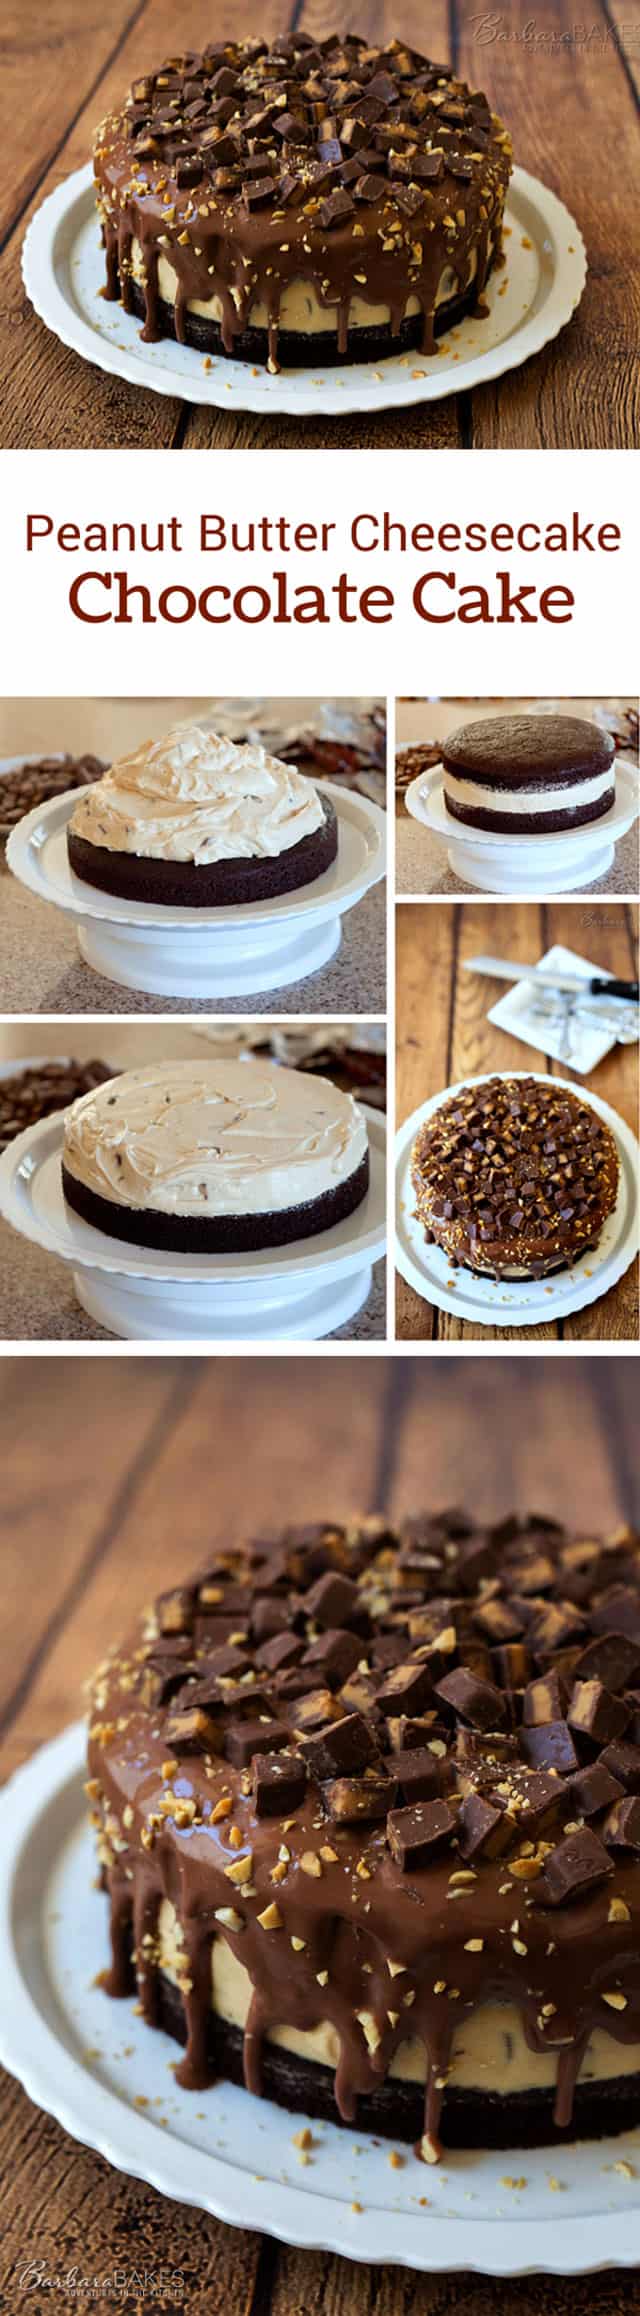 A collage of a rich, fudgy chocolate layer cake with a no-bake peanut butter cheesecake filling .